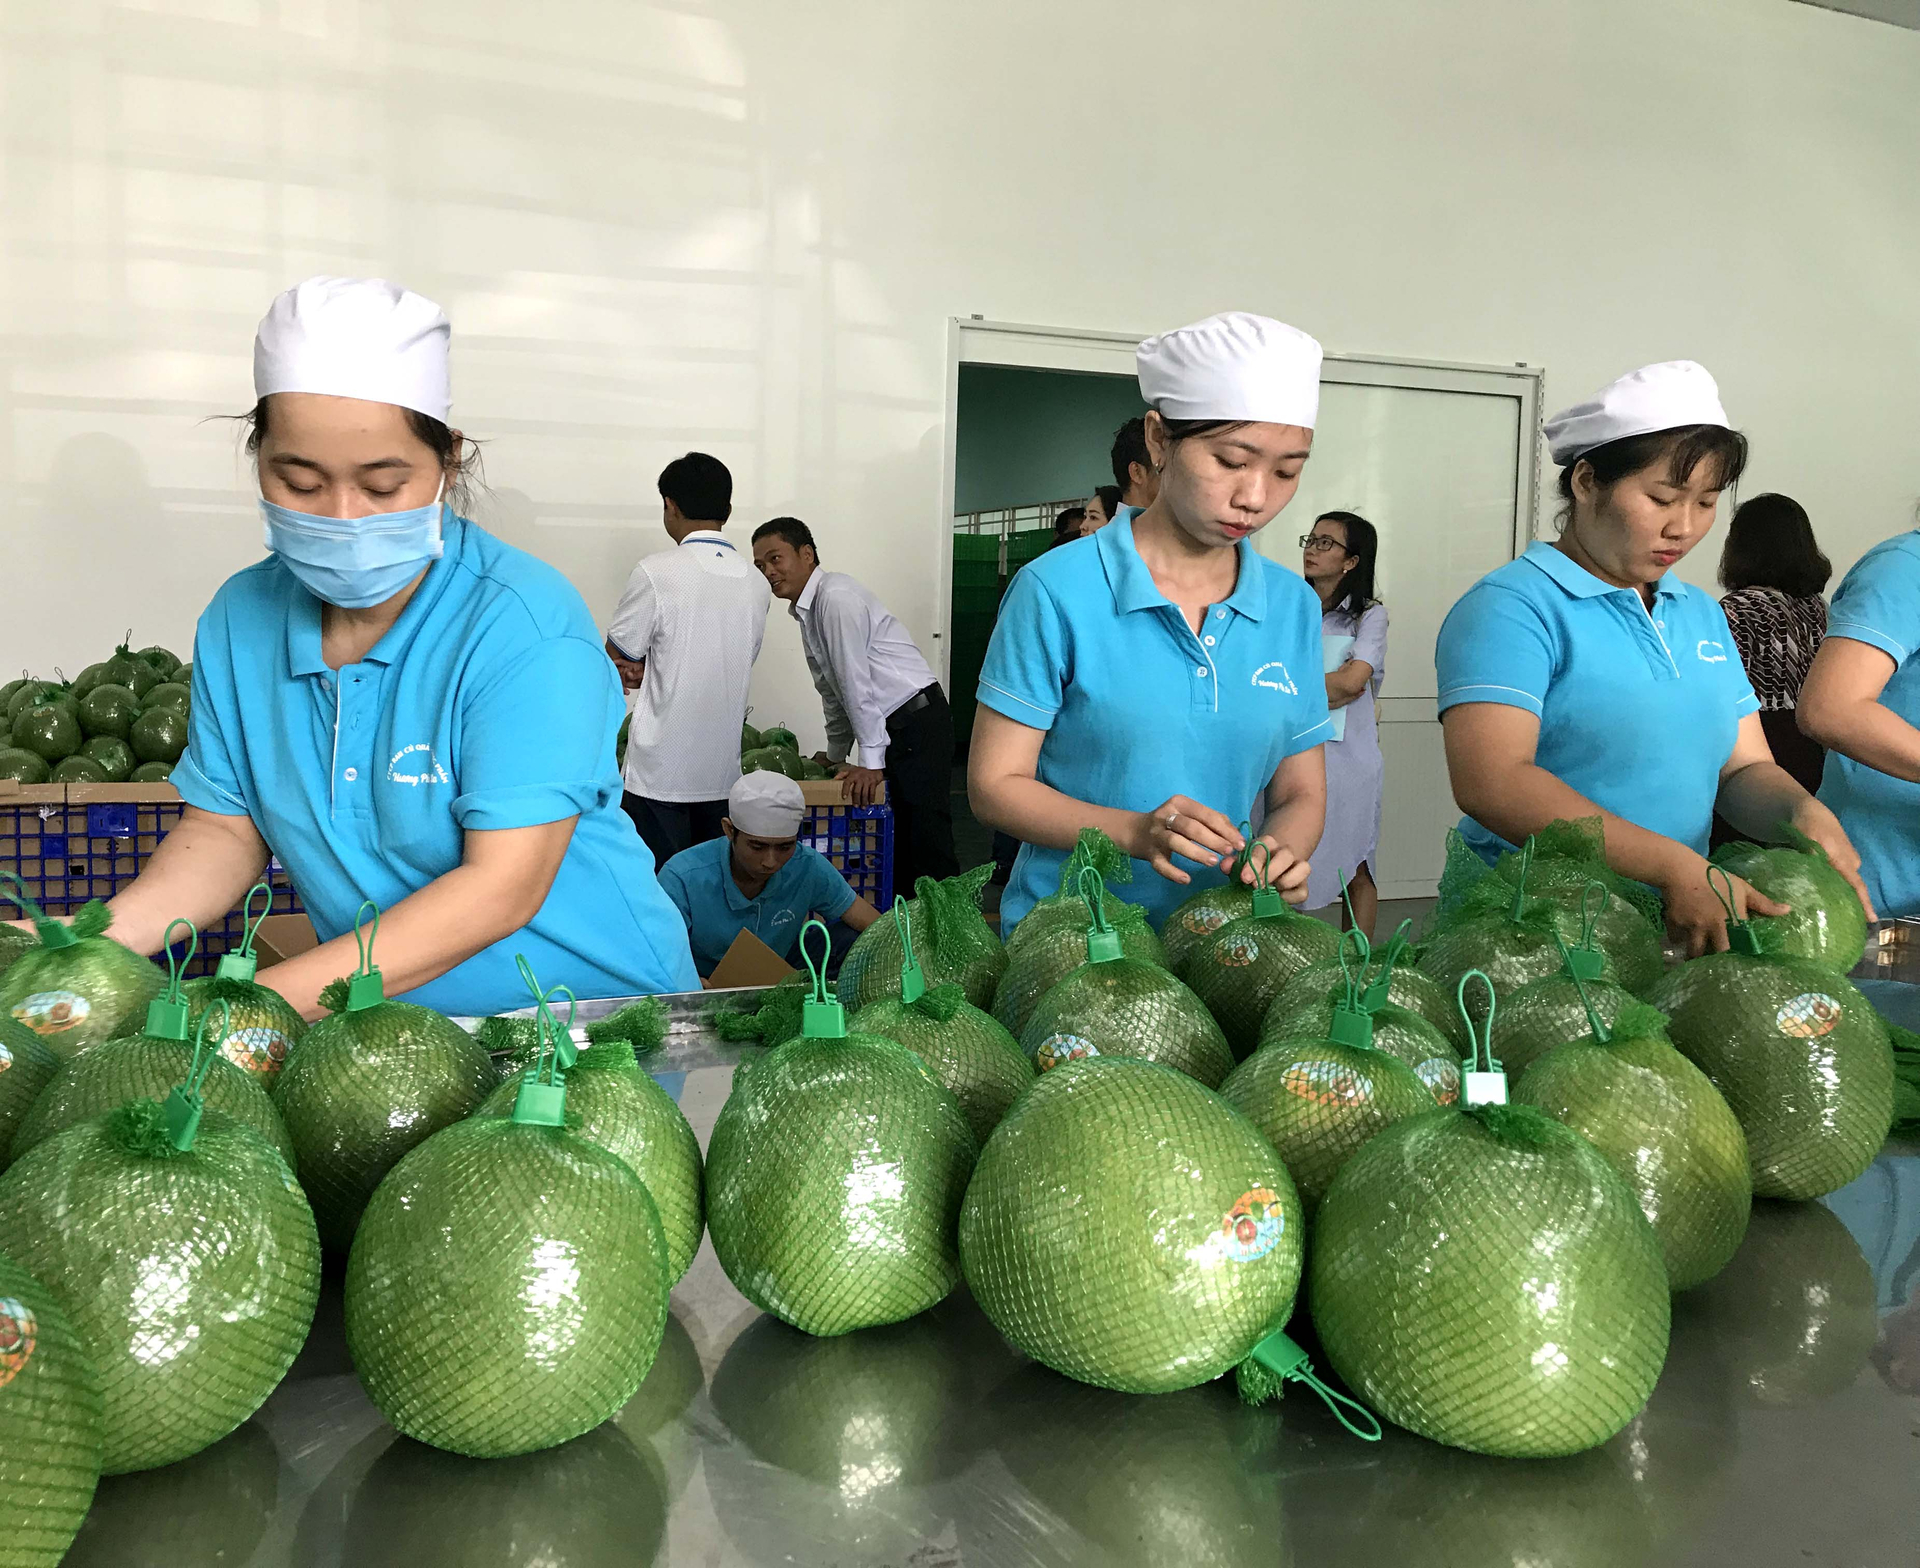 Fruits are the largest export category within Vietnam's structure of fruit and vegetable exports. Photo: Son Trang.